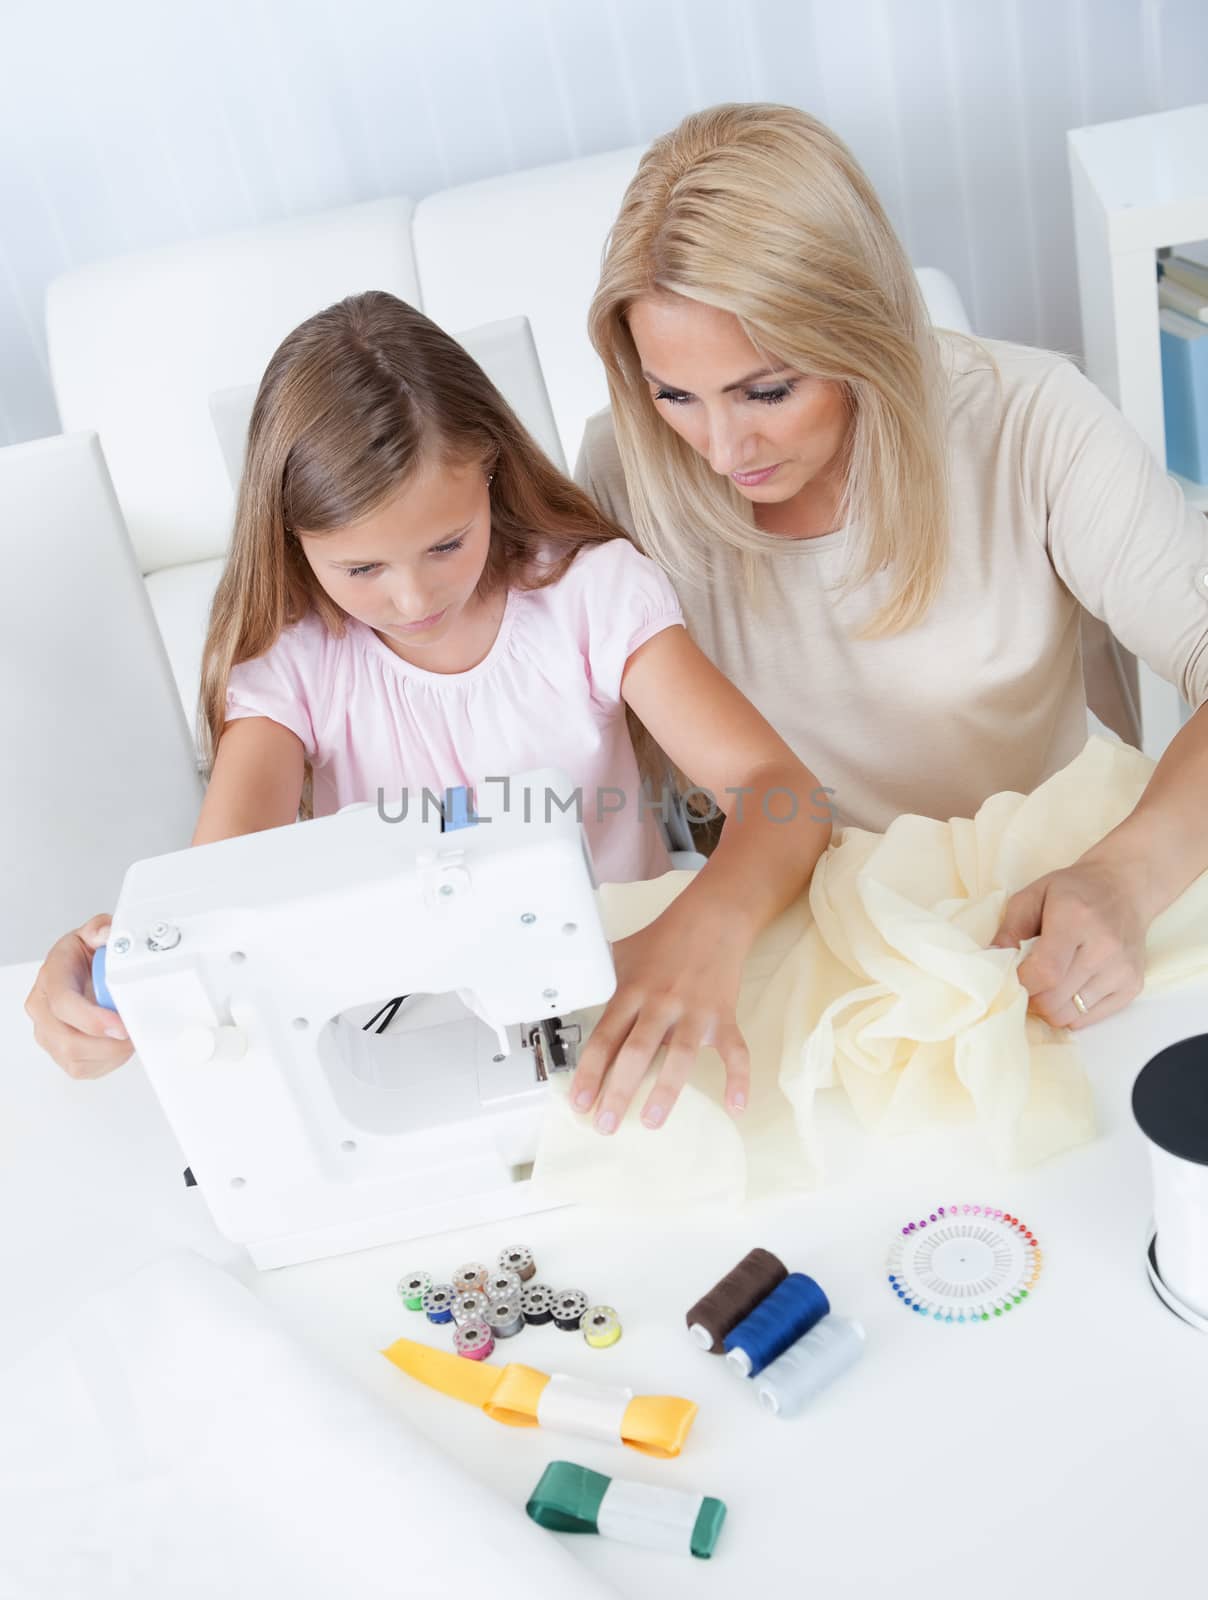 Beautiful Young Girl Sewing With Her Mother by AndreyPopov